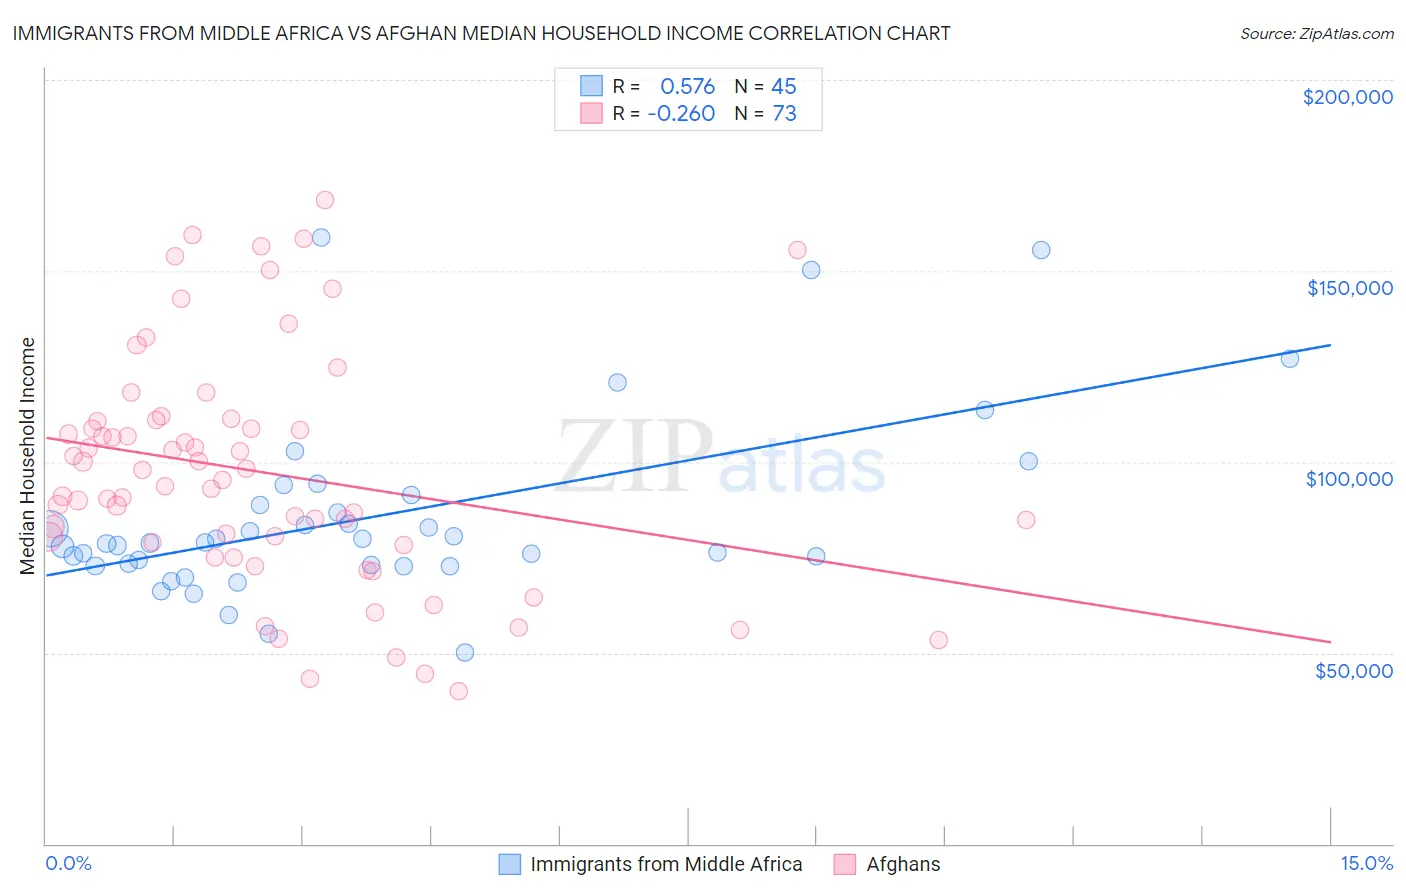 Immigrants from Middle Africa vs Afghan Median Household Income